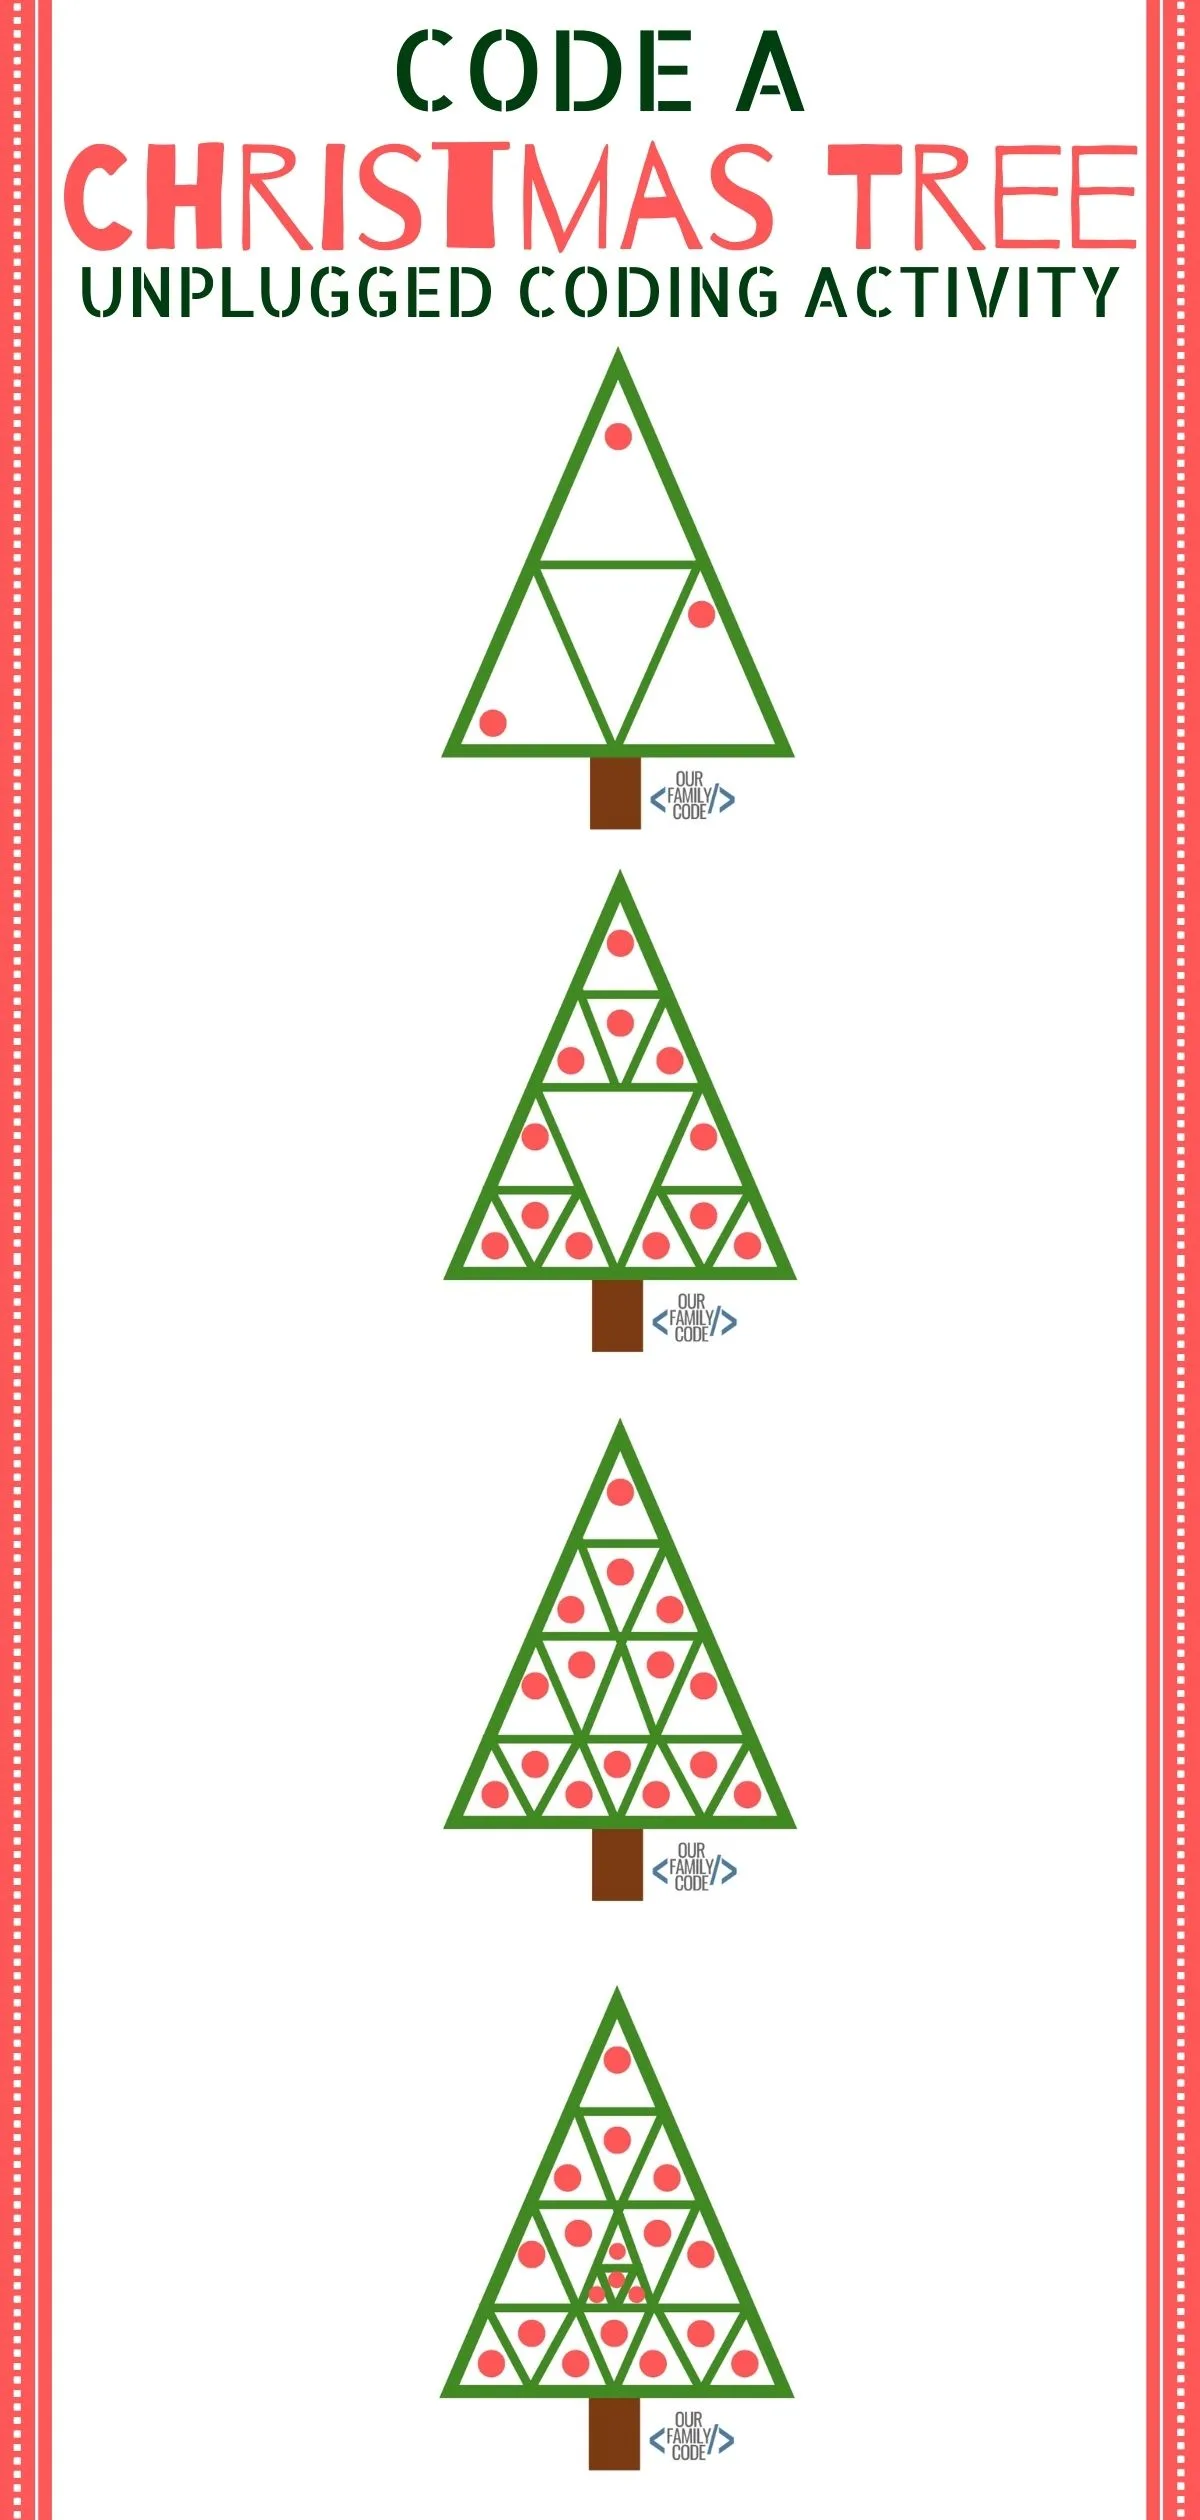 This Christmas tree algorithm art activity is an unplugged coding activity for kids K-8 to learn how everyday actions can be turned into a computer program. #HourofCode #teachkidstocode #kidcoders #STEAM #STEM #codingforkids #learntocode #Christmascrafts #Steampoweredholidays